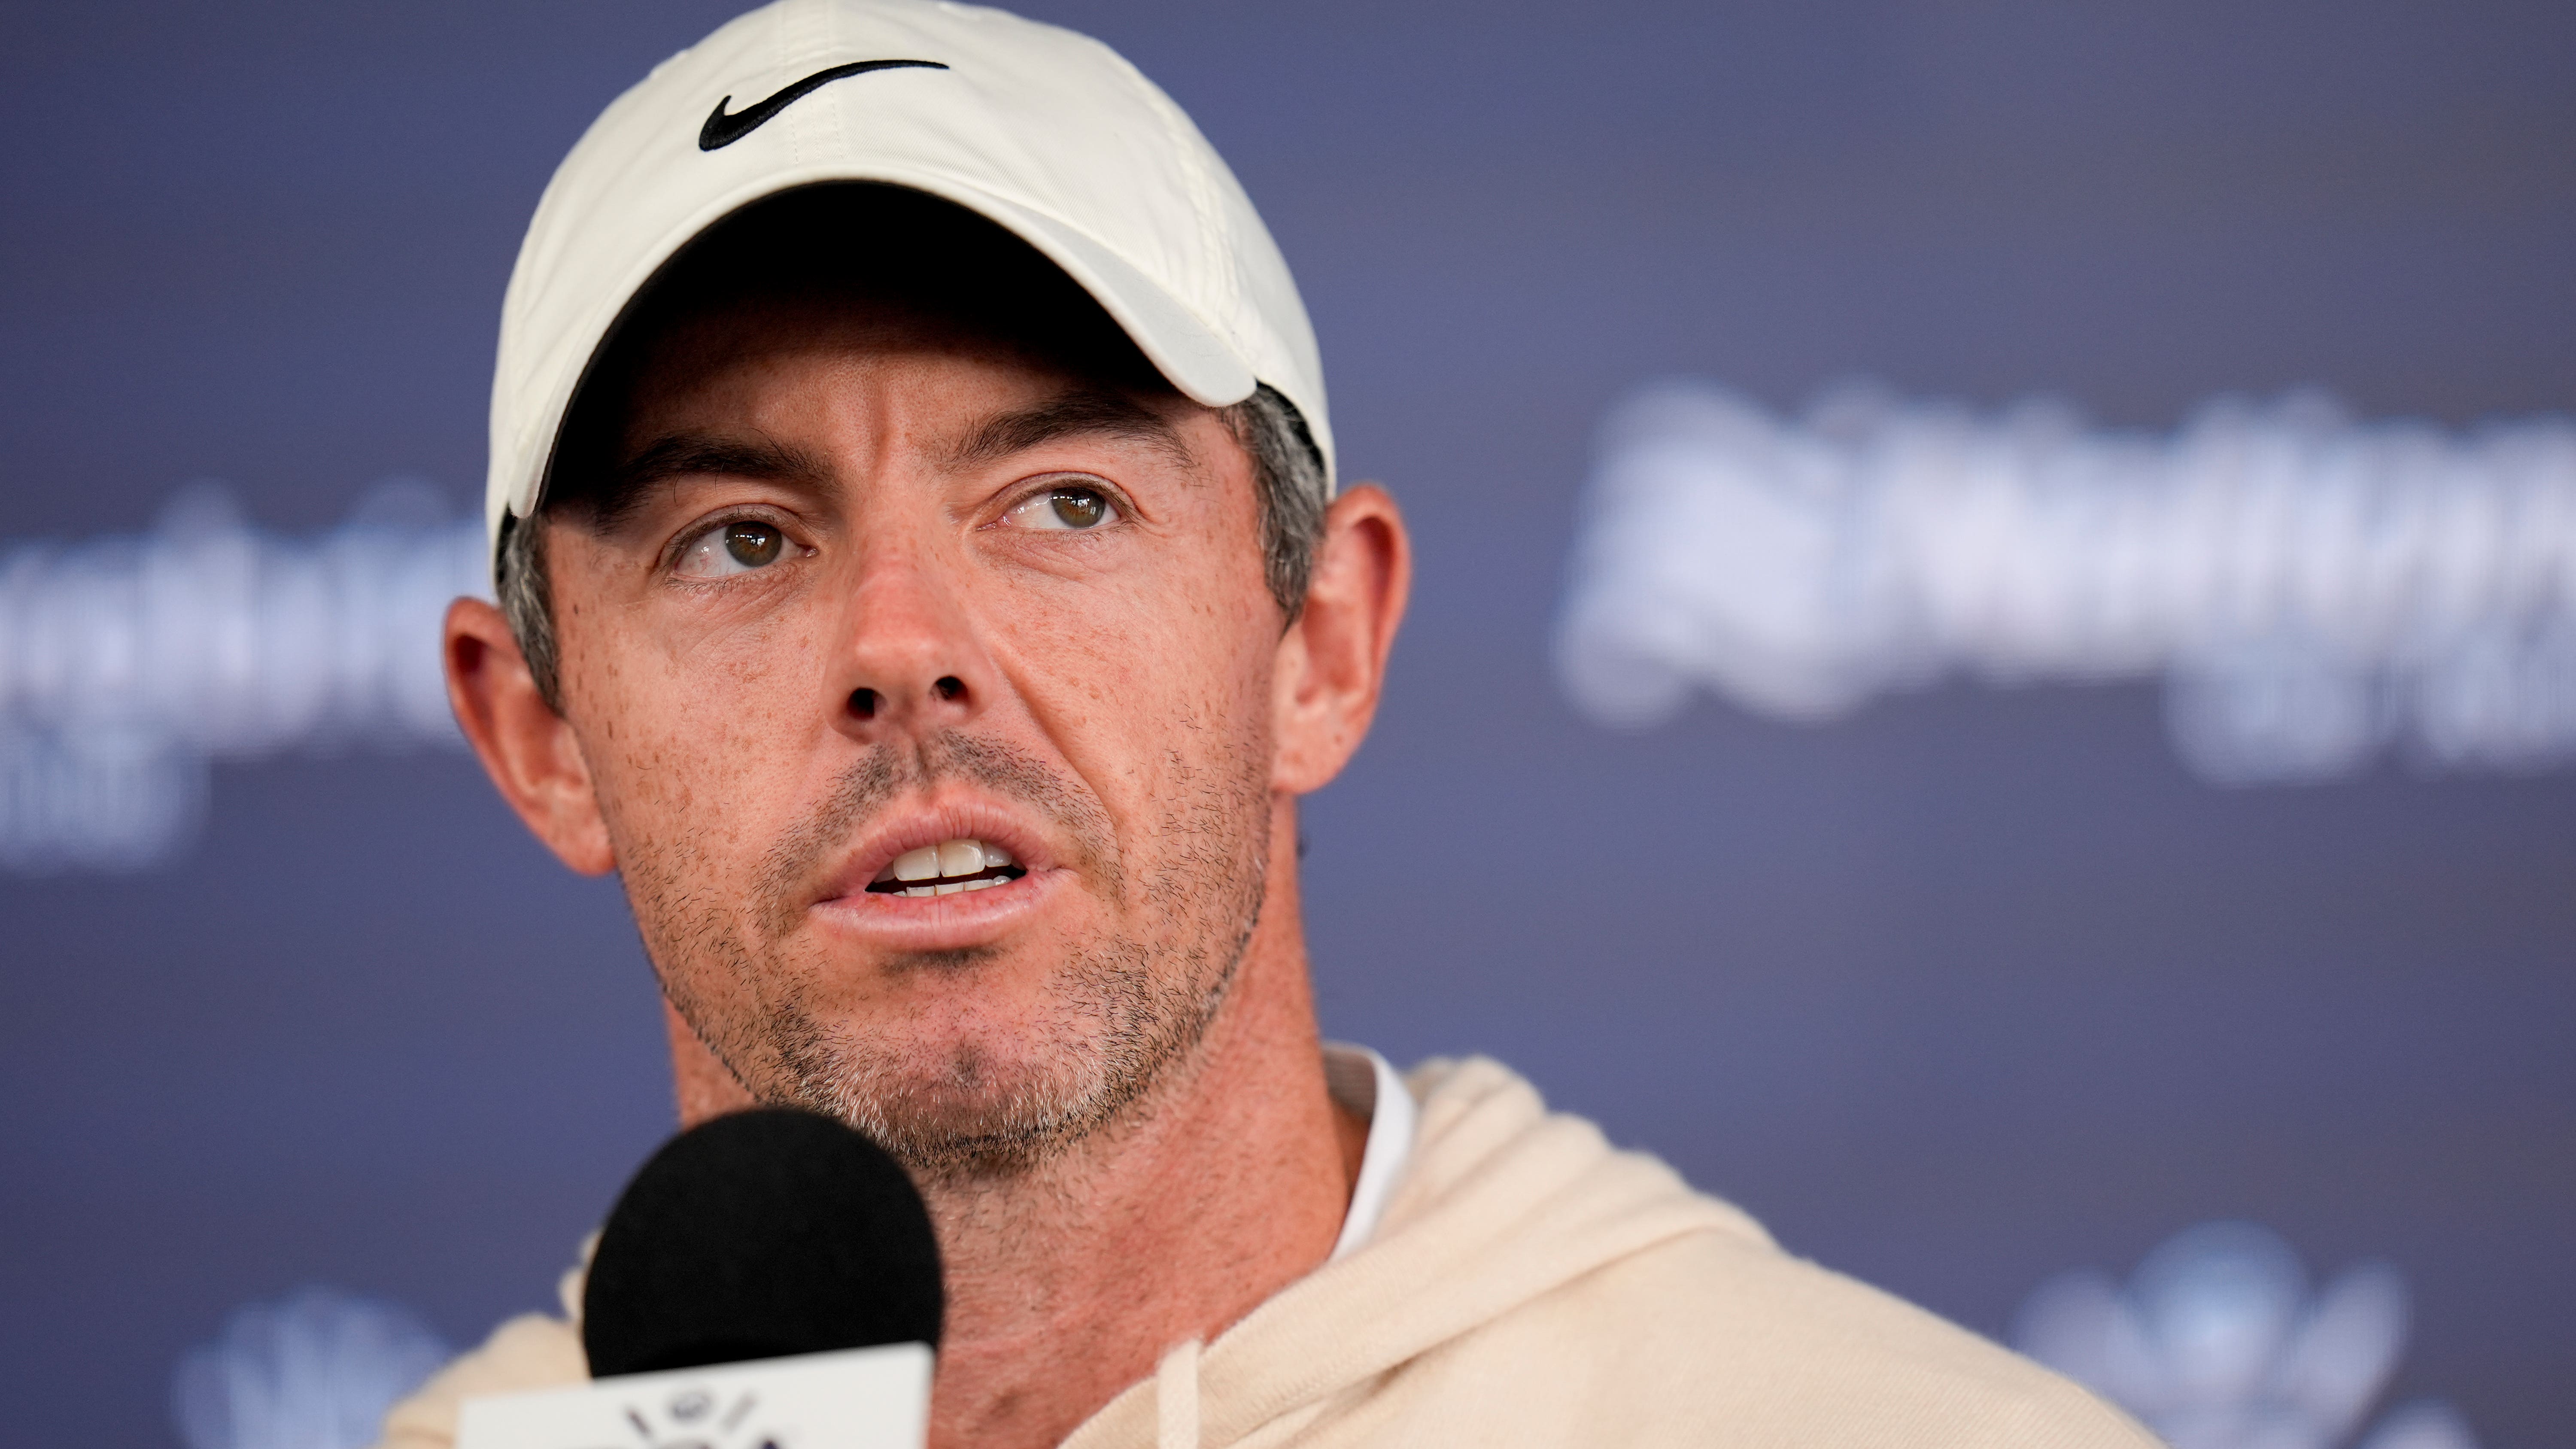 Rory McIlroy hoping to let golf do talking as US PGA Championship gets under way